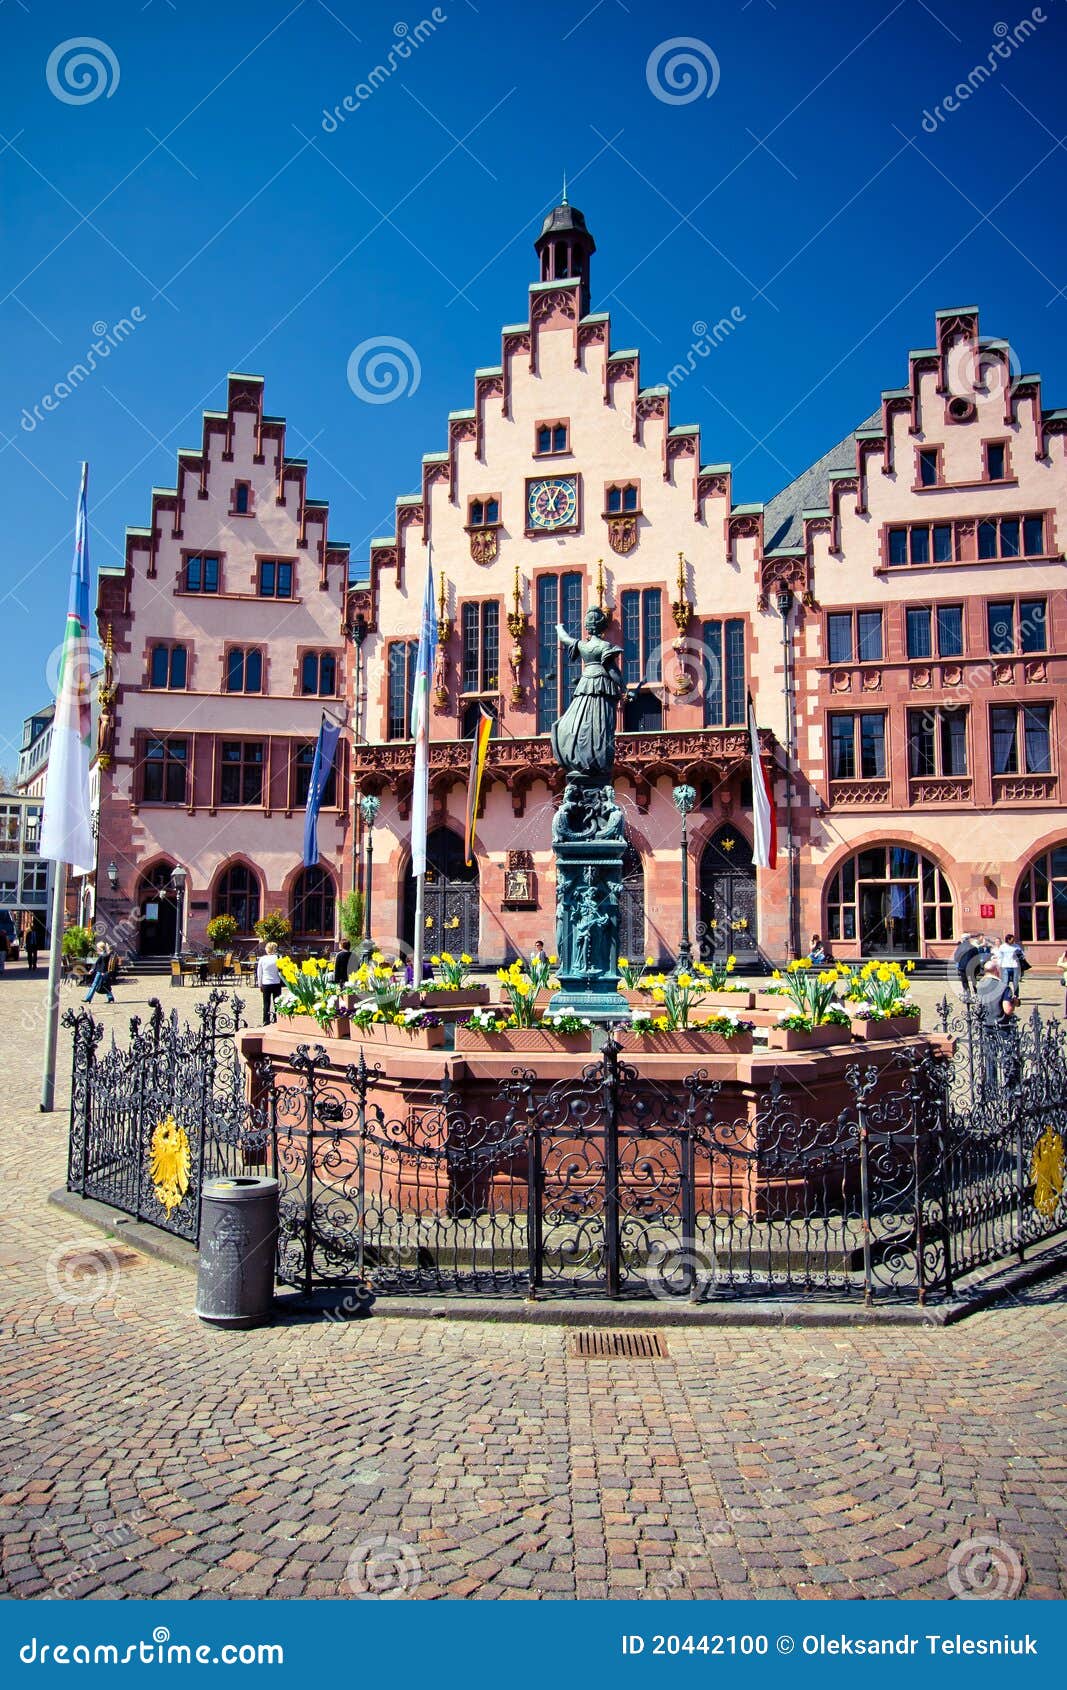 old city of frankfurt. roemer place